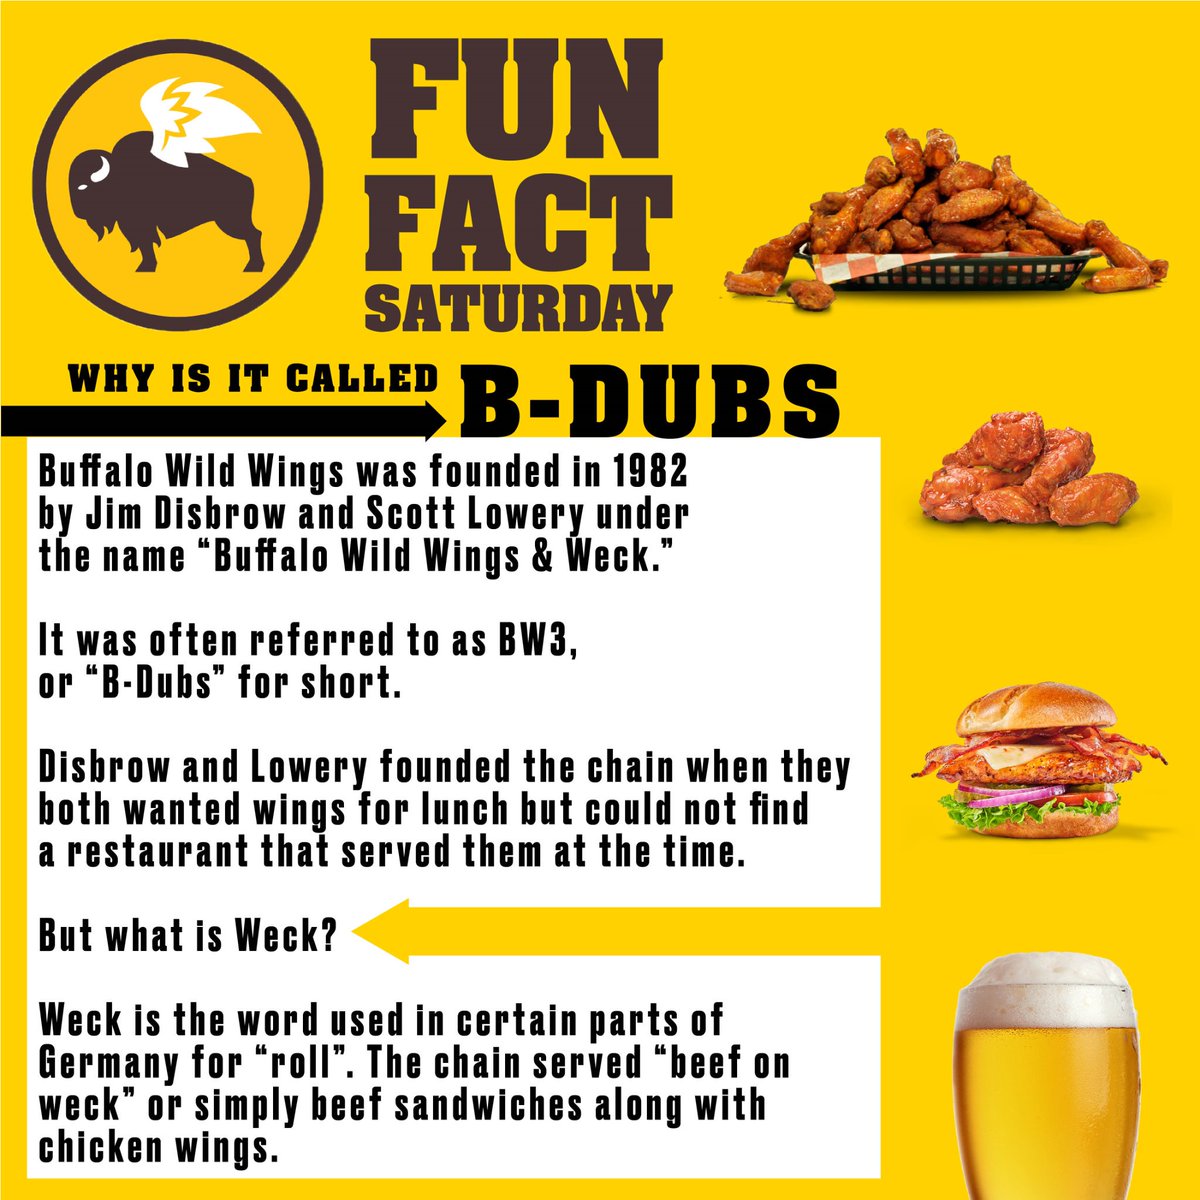 Creativity Design Group on Twitter: "Why is Buffalo Wild Wings called Find out here. #corporateidentity #marketing #branding #brandingidentity #corporateidentity #corporatebranding #corporateidentitydesign #brandingdesign #brandingdesign ...